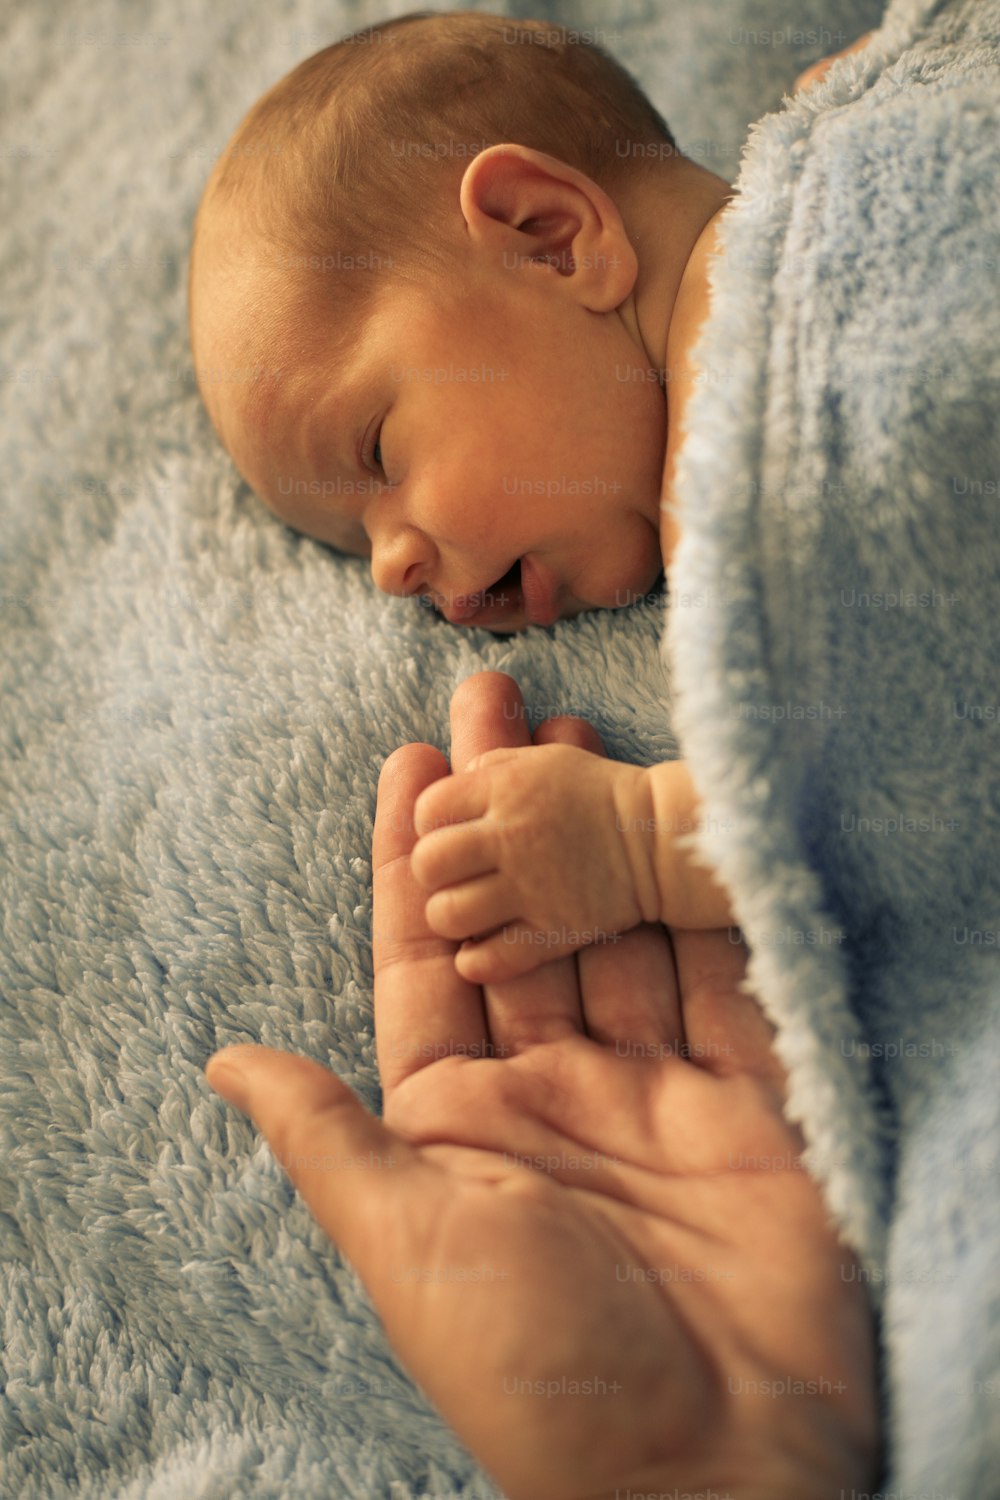 Newborn baby boy holding hand of his mother.